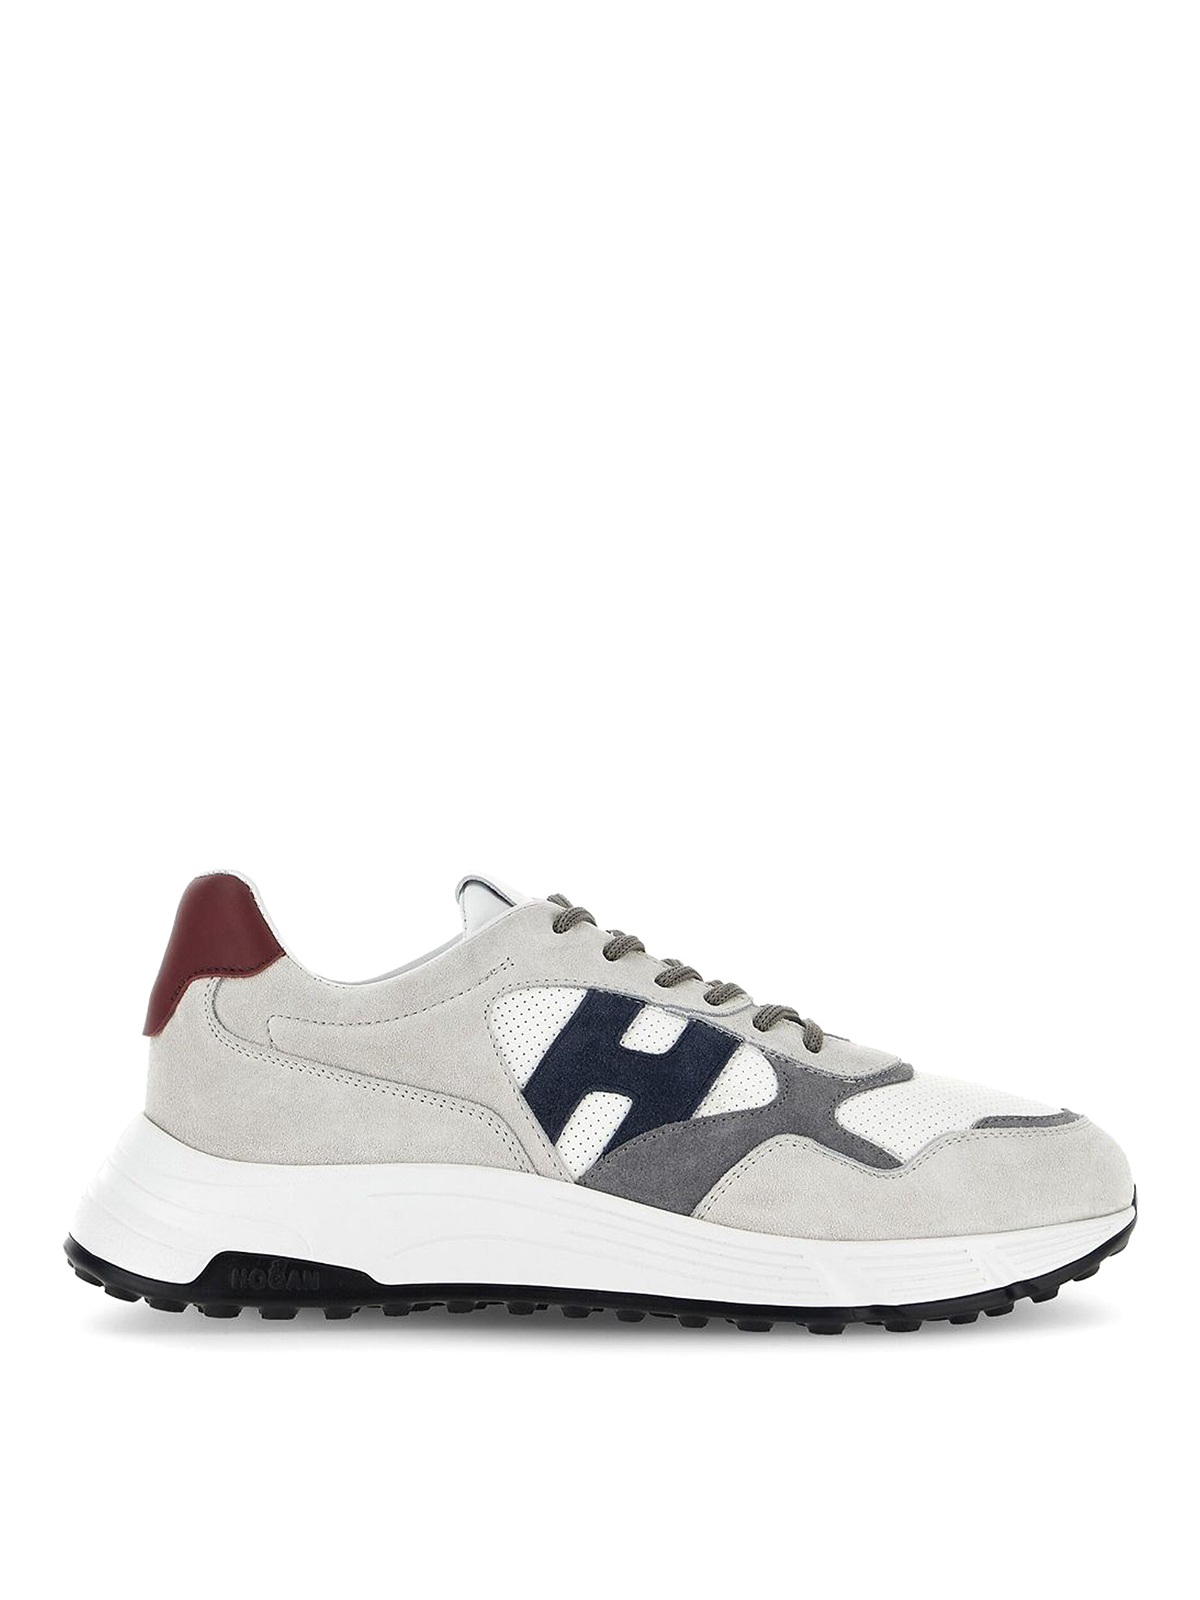 Hogan Hyperlight Panelled Leather Sneakers In Grey